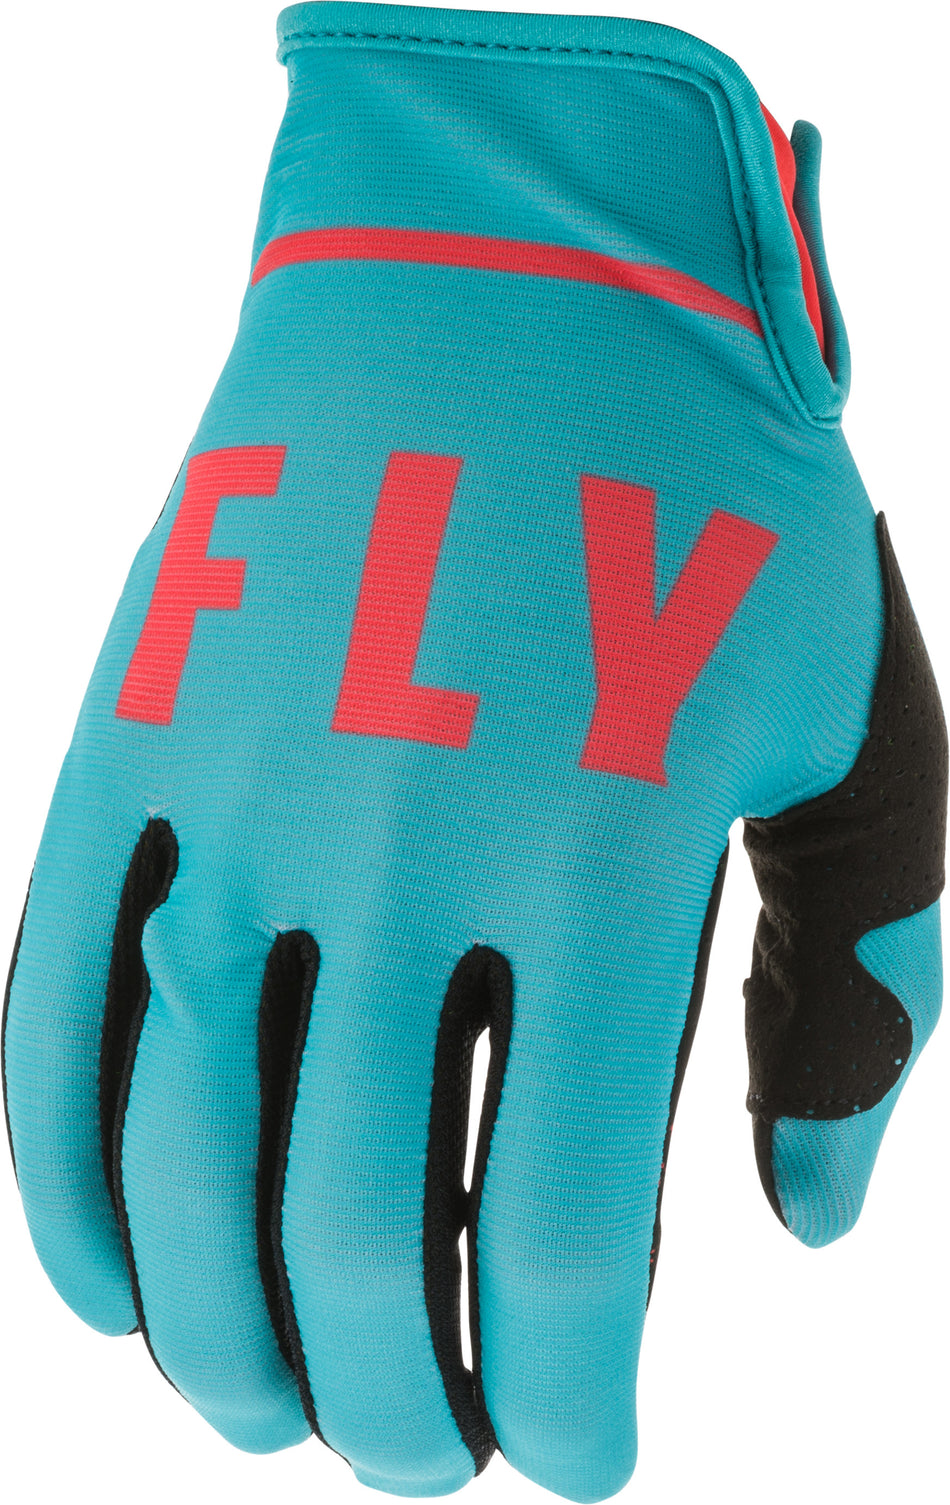 FLY RACING Lite Gloves Blue/Coral Sz 12 373-71912